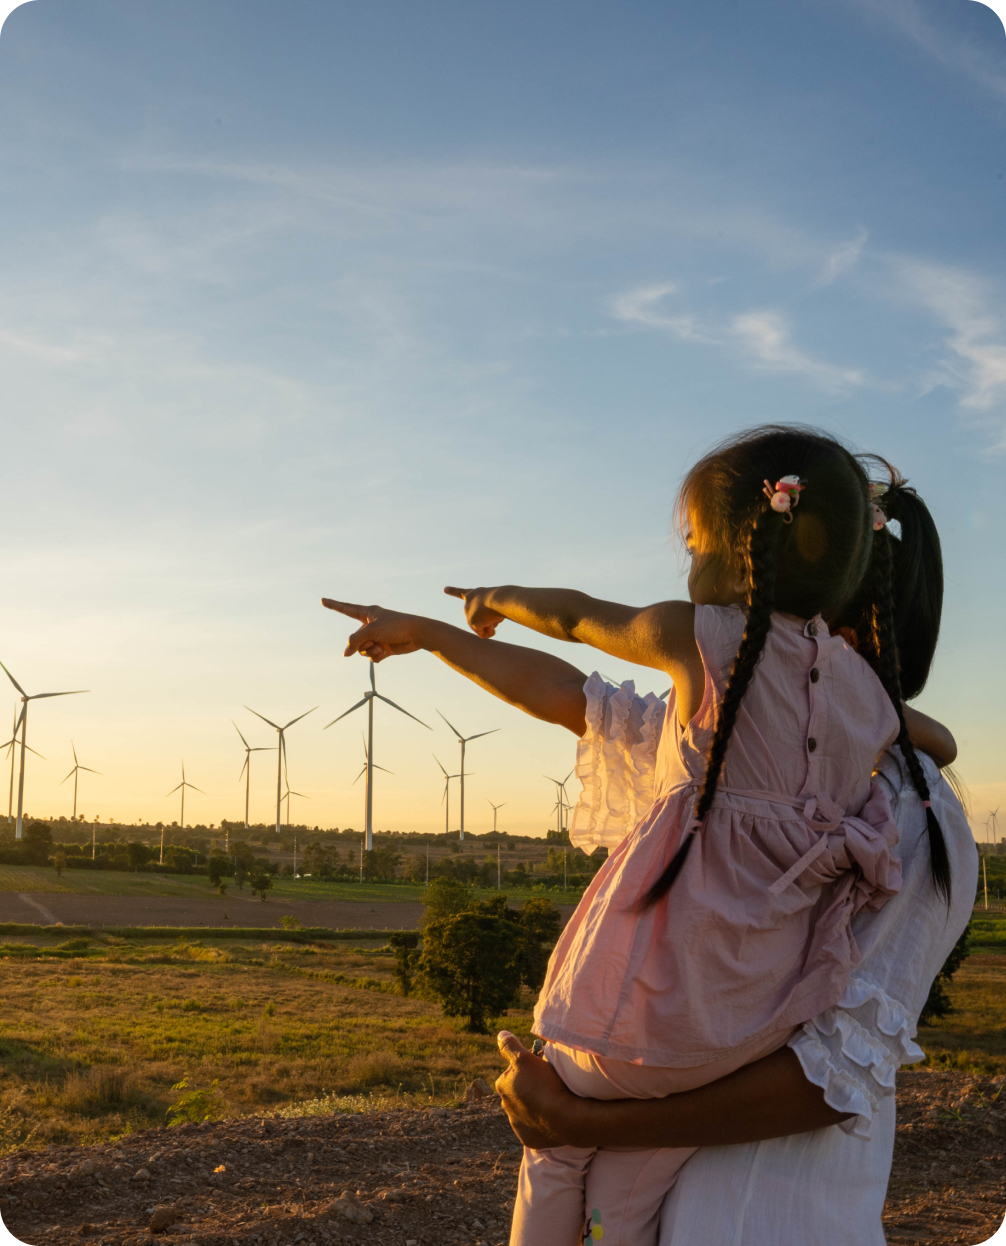 Mother and child pointing at a wind farm with a sunset and blue sky in the background.